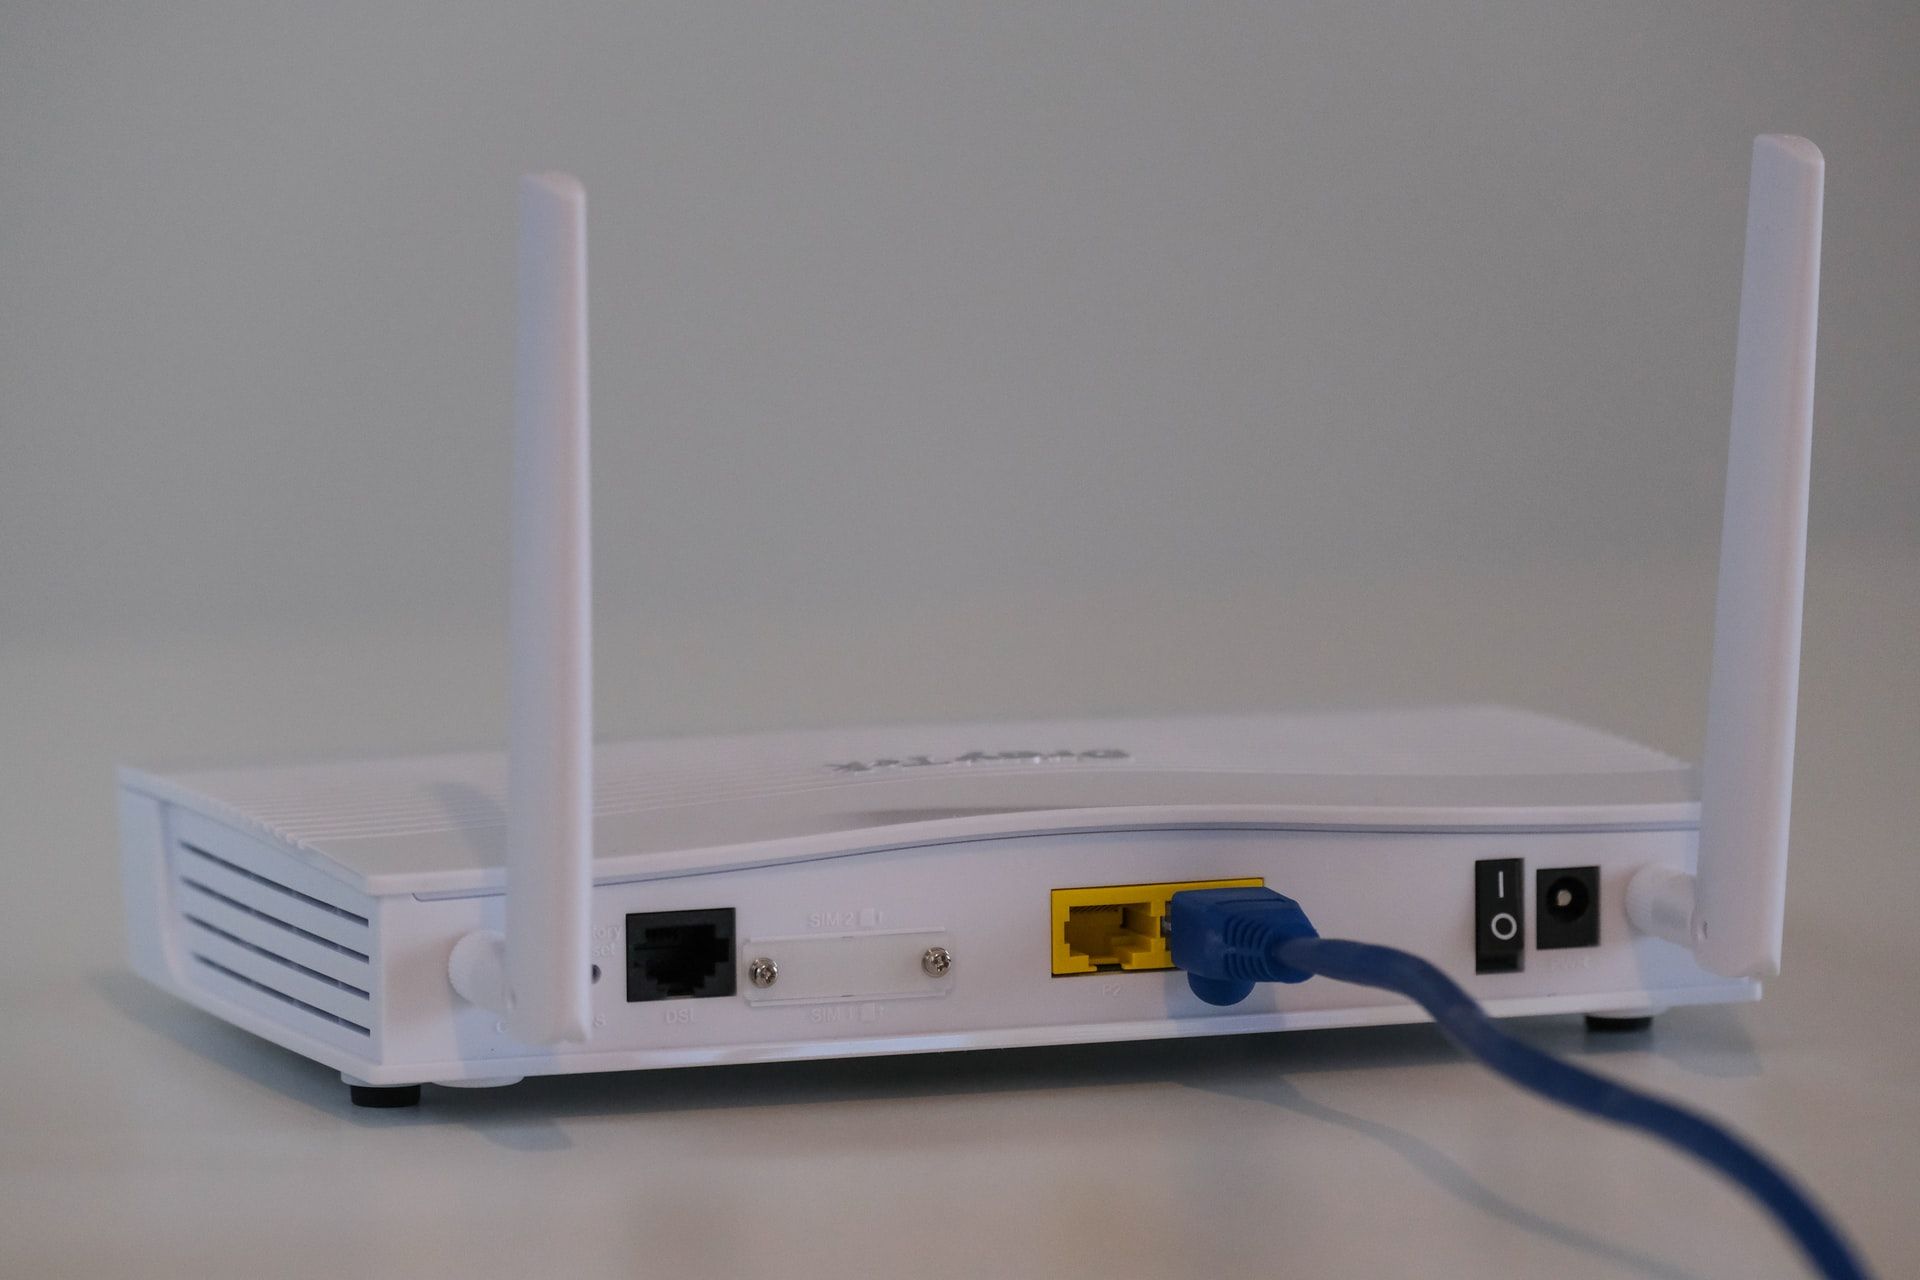 A simple Wi-Fi router